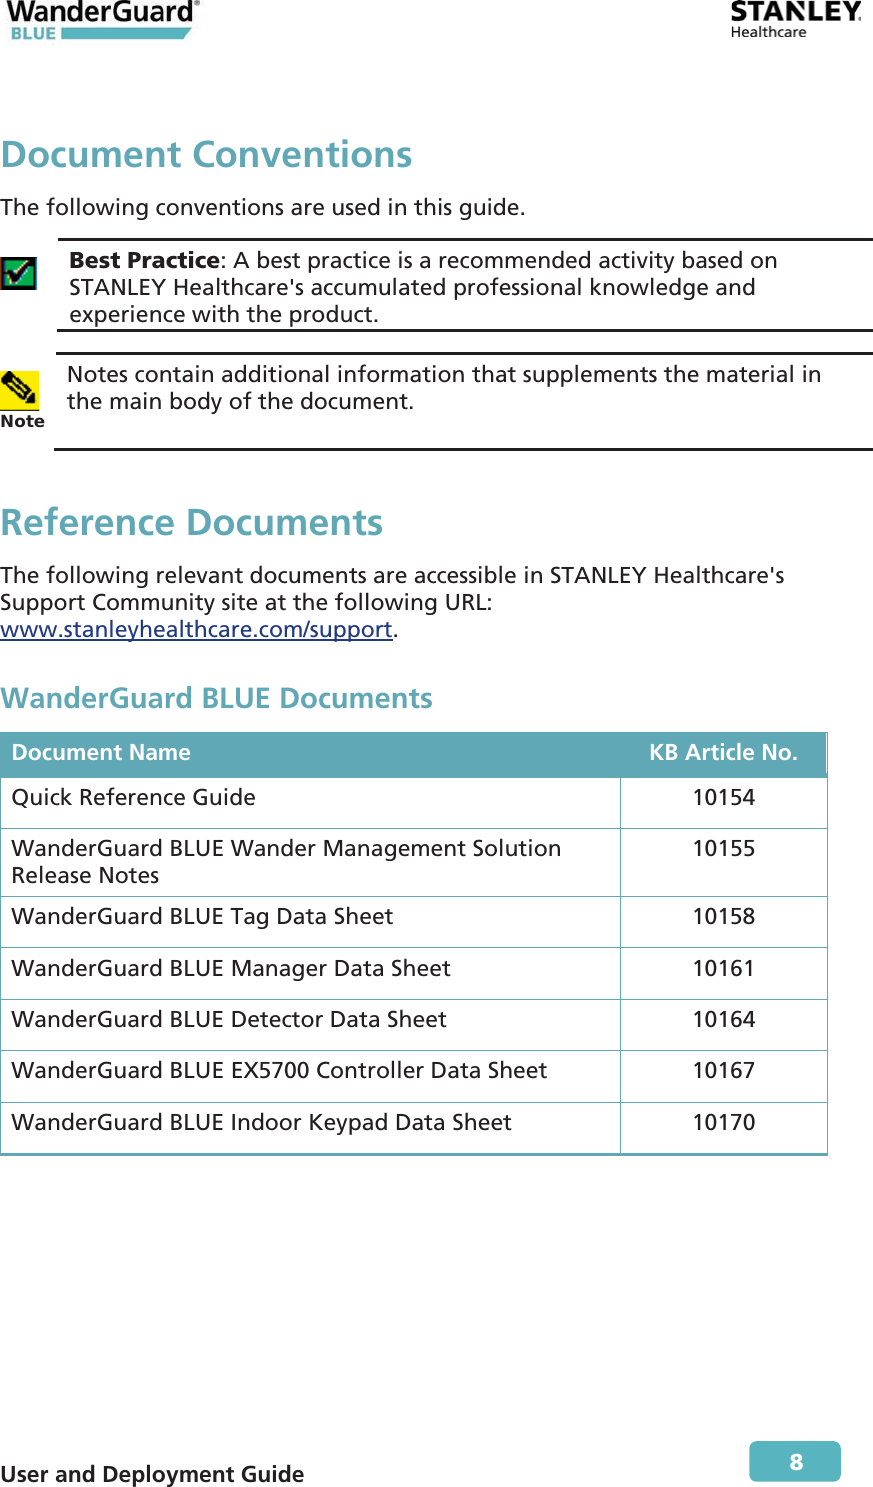  User and Deployment Guide        8 Document ConventionsThe following conventions are used in this guide.  Best Practice: A best practice is a recommended activity based on STANLEY Healthcare&apos;s accumulated professional knowledge and experience with the product.   Note Notes contain additional information that supplements the material in the main body of the document. Reference Documents The following relevant documents are accessible in STANLEY Healthcare&apos;s Support Community site at the following URL: www.stanleyhealthcare.com/support. WanderGuard BLUE Documents Document Name  KB Article No. Quick Reference Guide  10154 WanderGuard BLUE Wander Management Solution Release Notes 10155 WanderGuard BLUE Tag Data Sheet  10158 WanderGuard BLUE Manager Data Sheet  10161 WanderGuard BLUE Detector Data Sheet  10164 WanderGuard BLUE EX5700 Controller Data Sheet  10167 WanderGuard BLUE Indoor Keypad Data Sheet  10170 